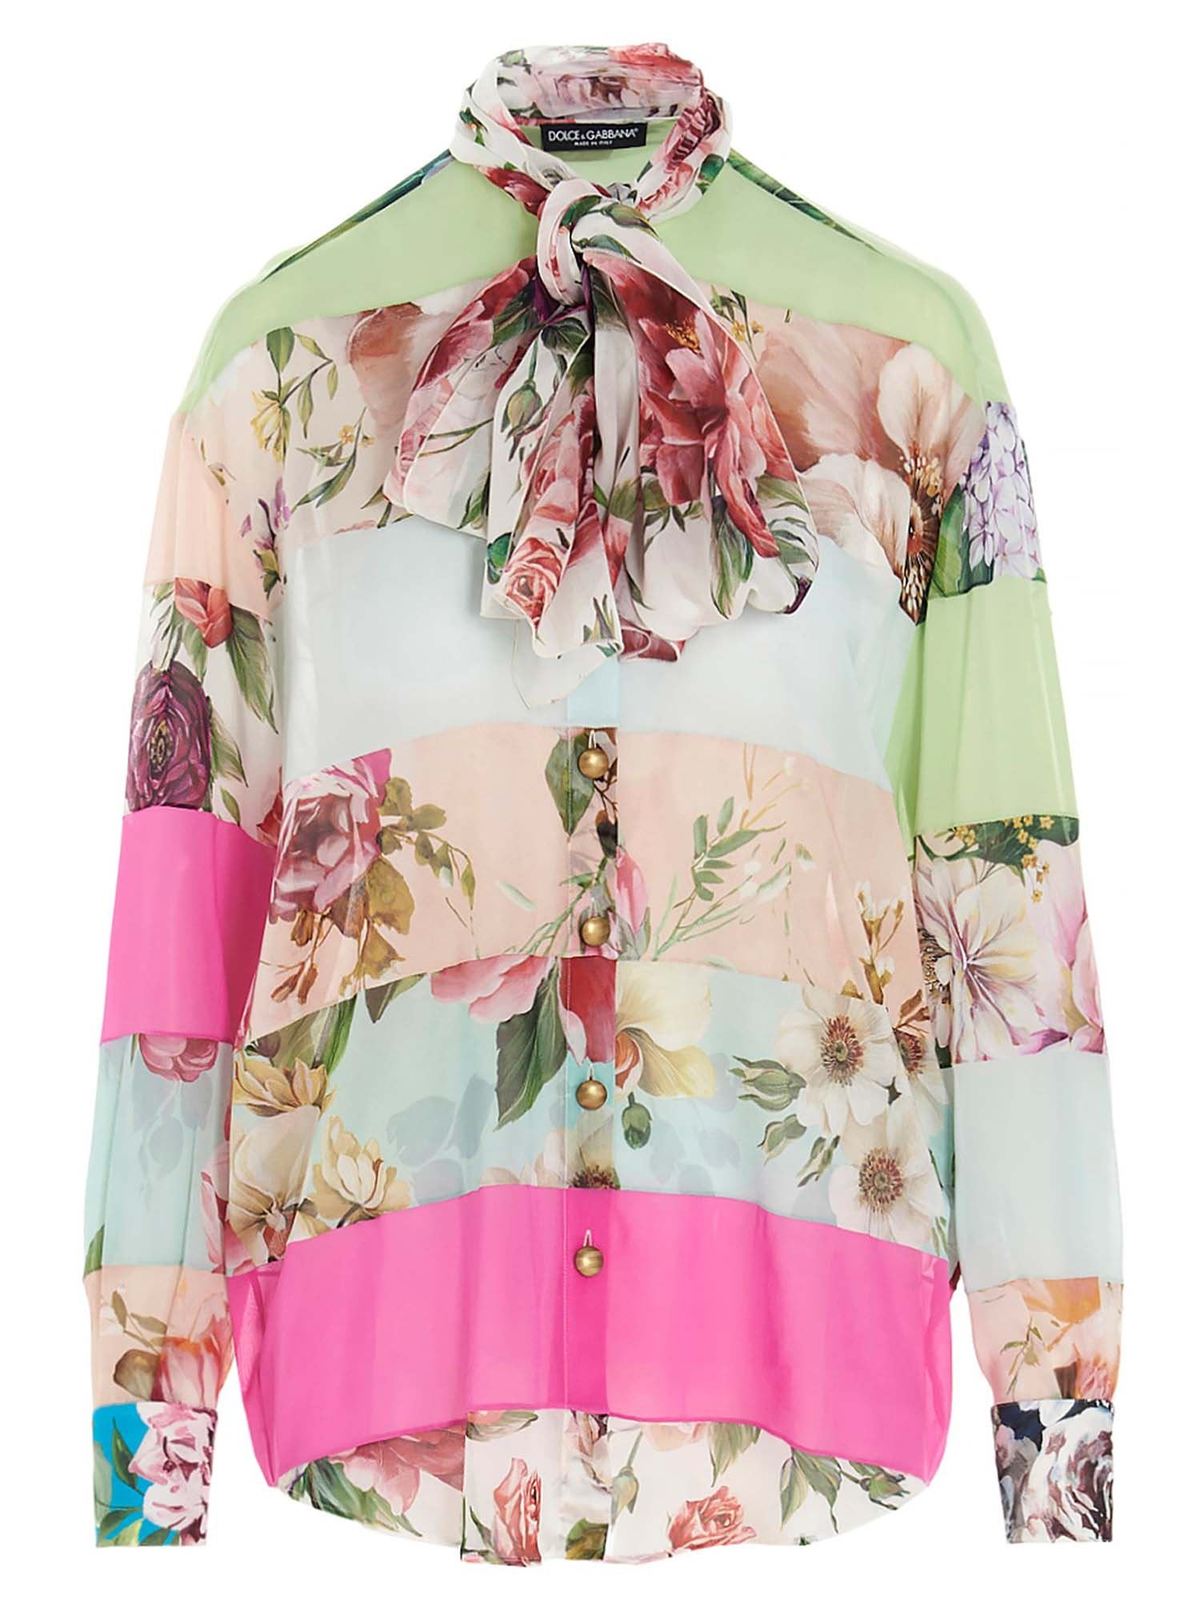 DOLCE & GABBANA FLORAL PATCHWORK SHIRT IN MULTICOLOR